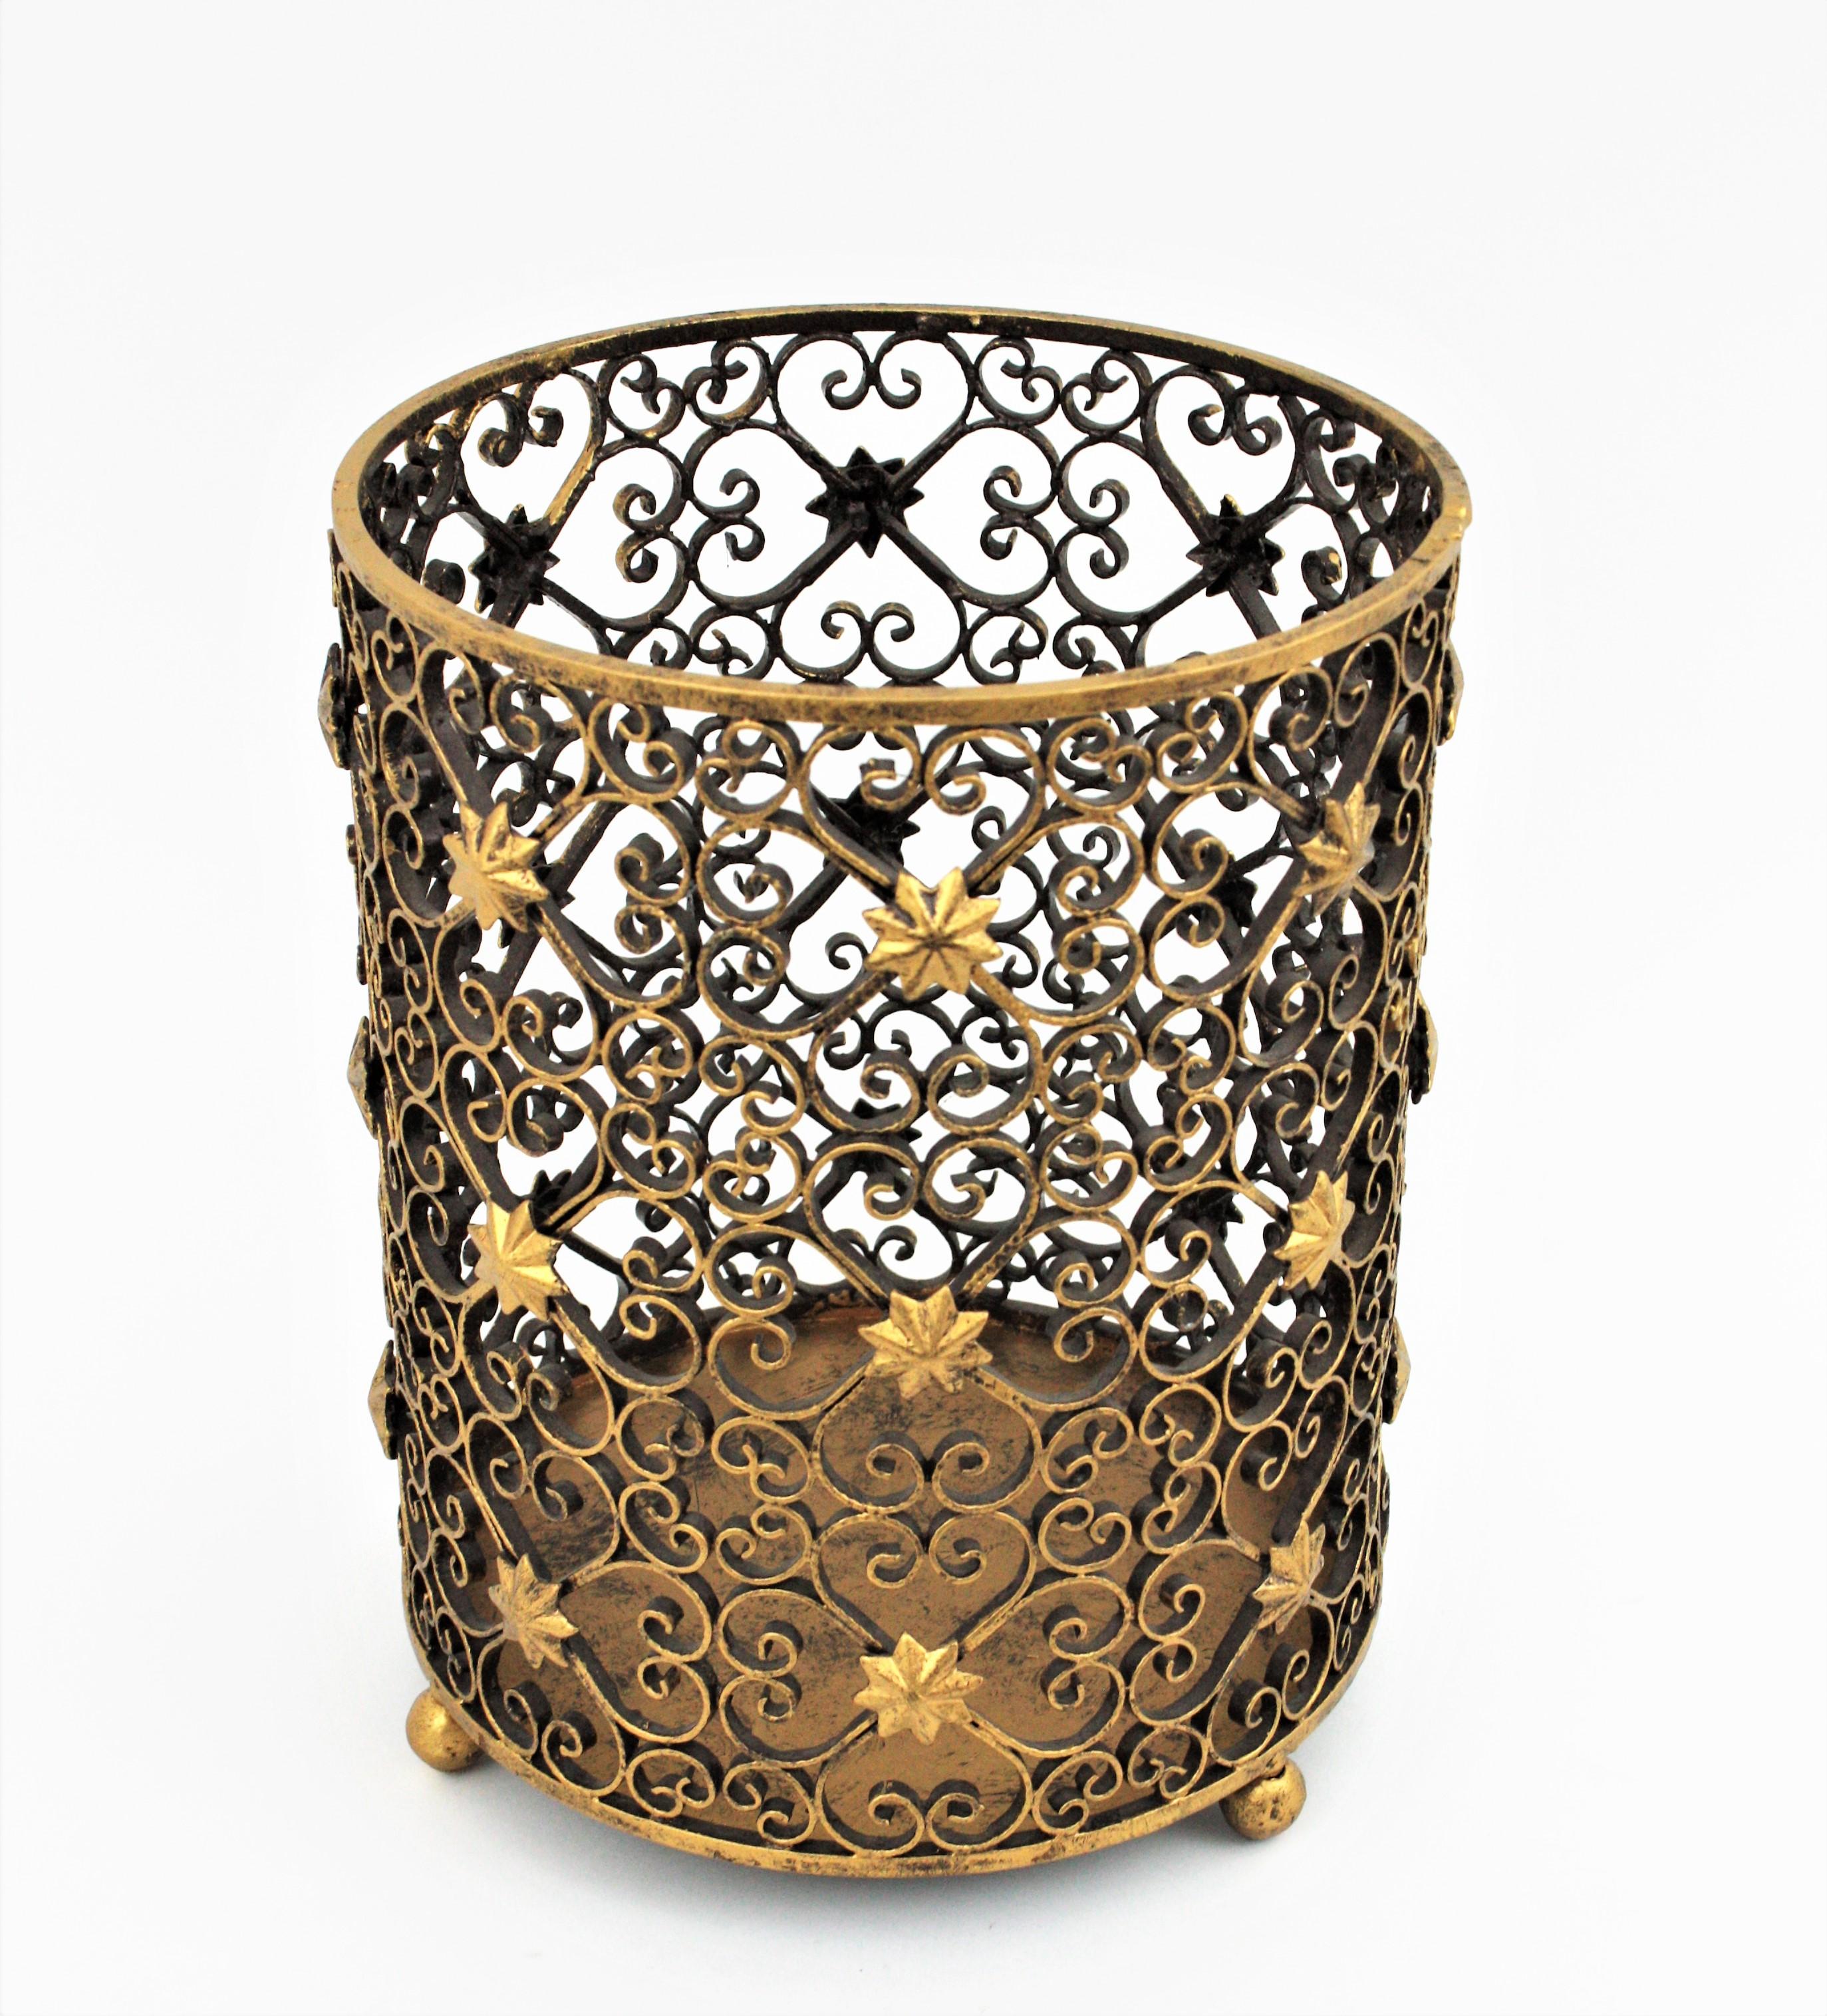 20th Century French Scrollwork Waste Basket Bin in Gilt Wrought Iron with Star Accents